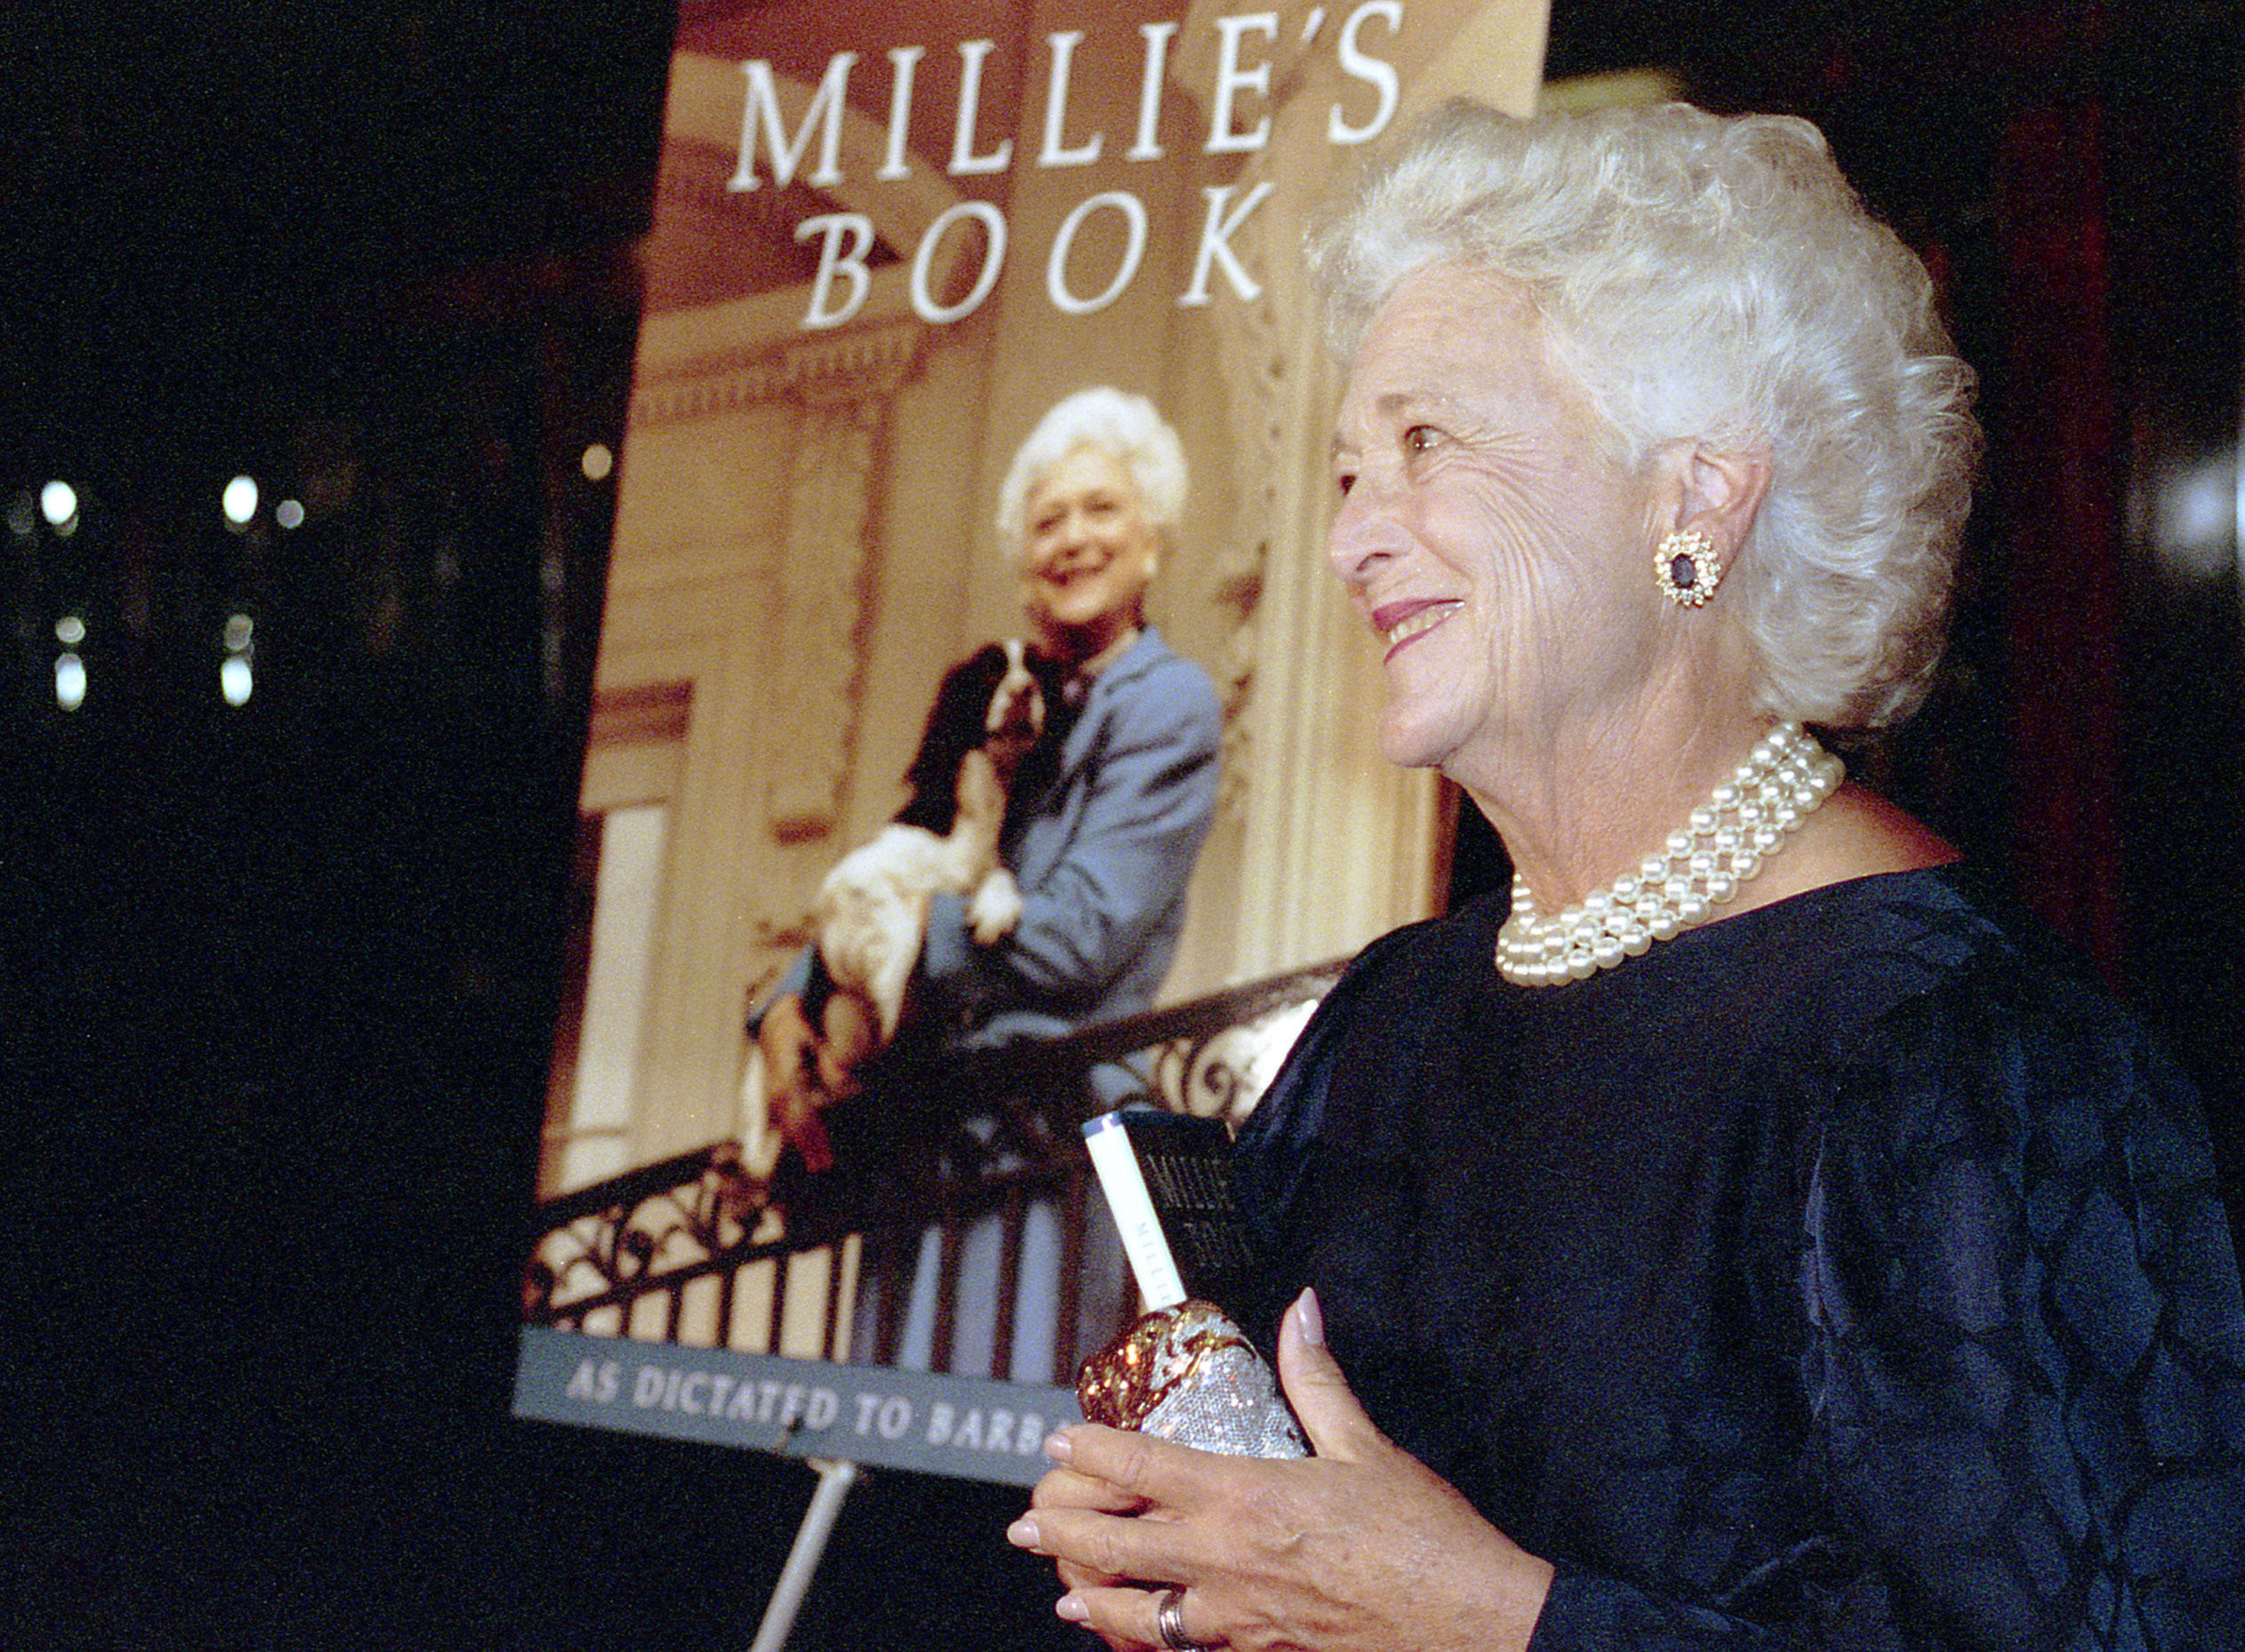 Mrs.Bush at the opening celebration for Millie’s Book